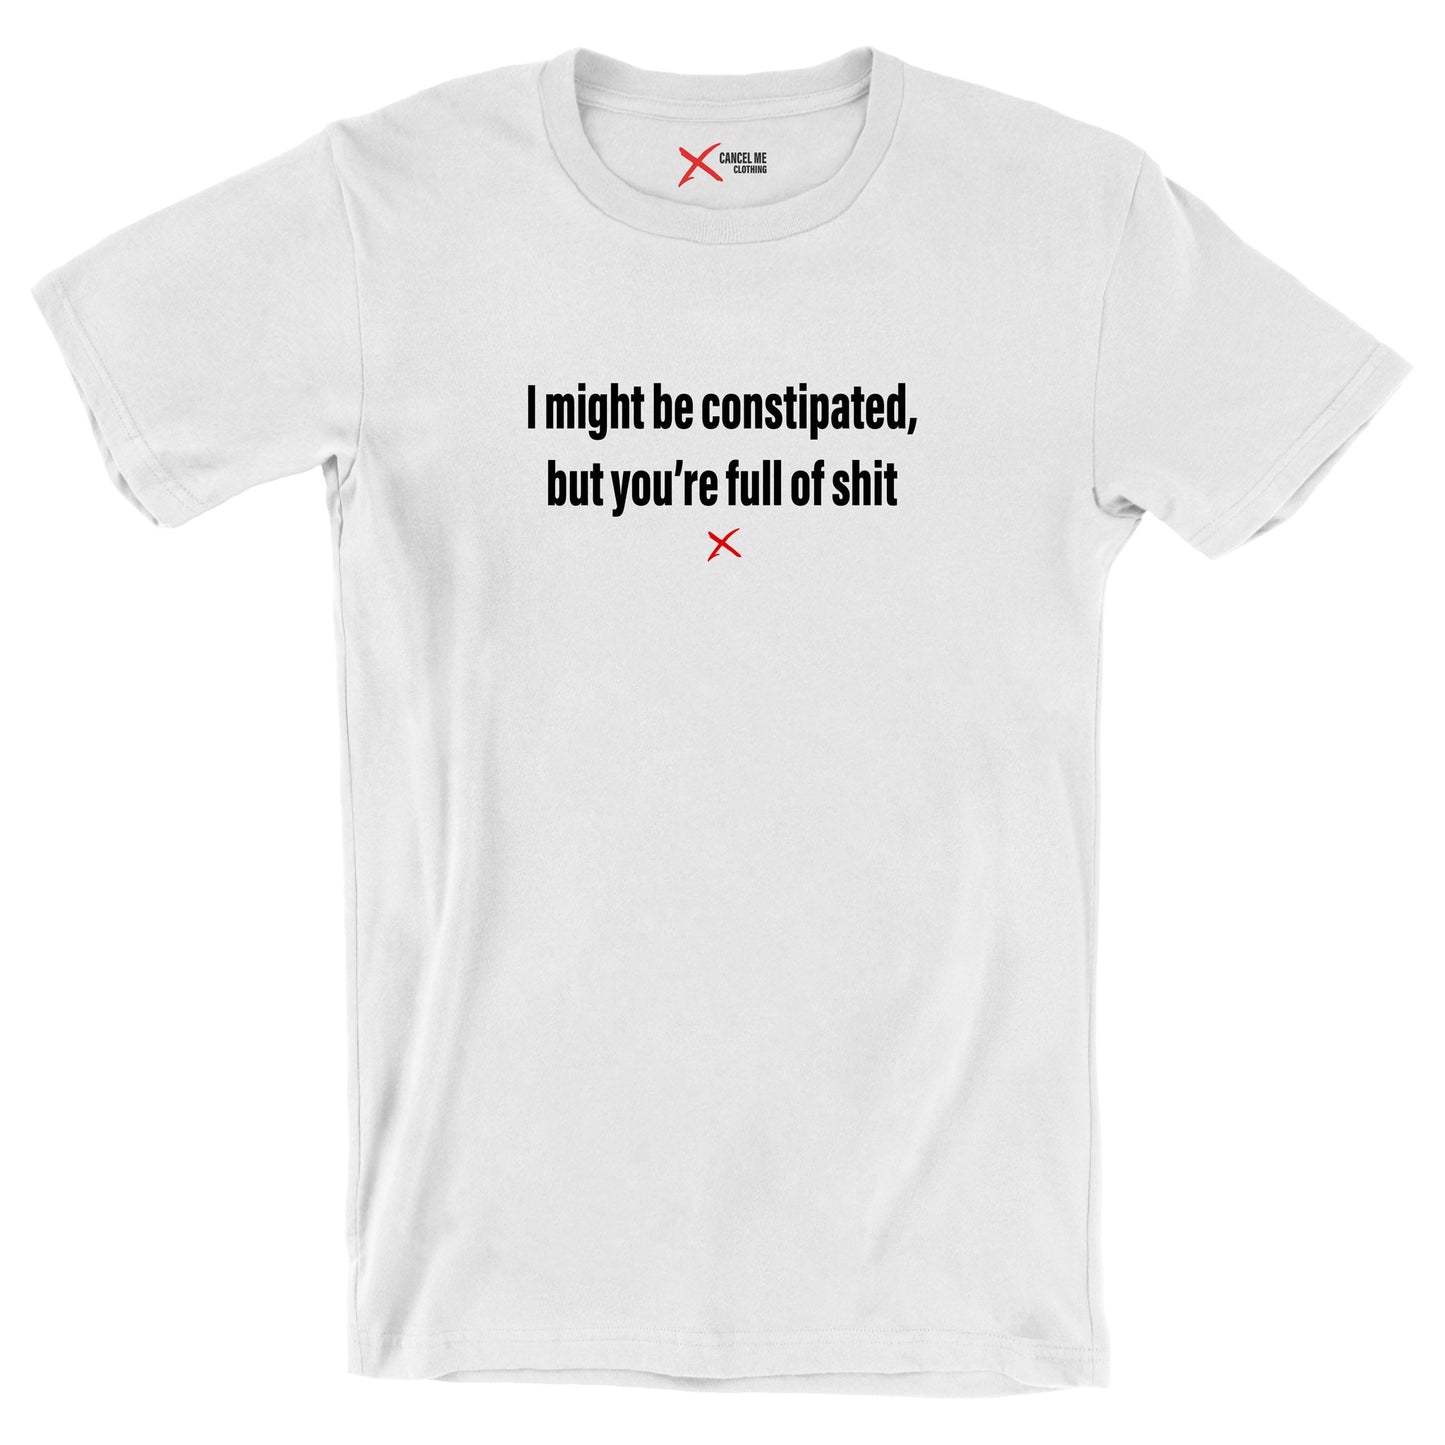 I might be constipated, but you're full of shit - Shirt